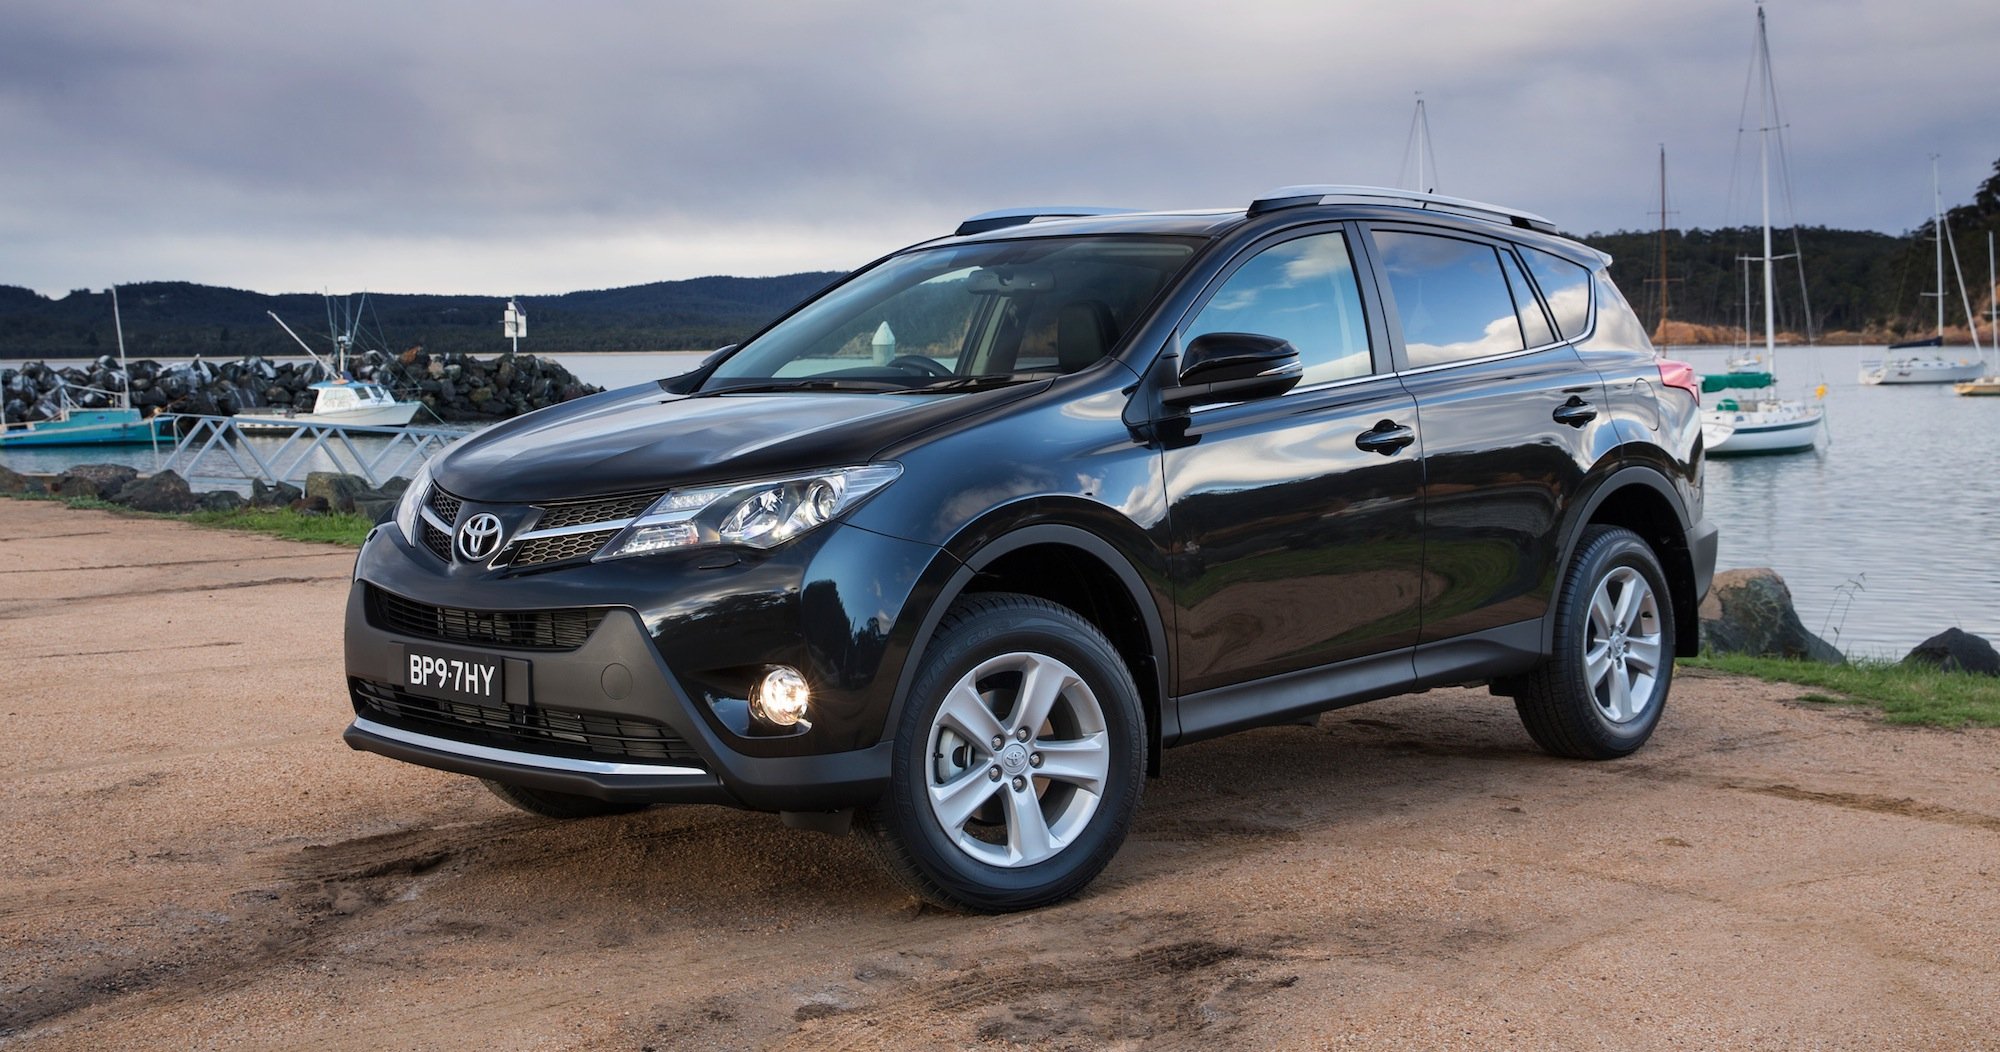 2014 toyota rav4 limited owners manual